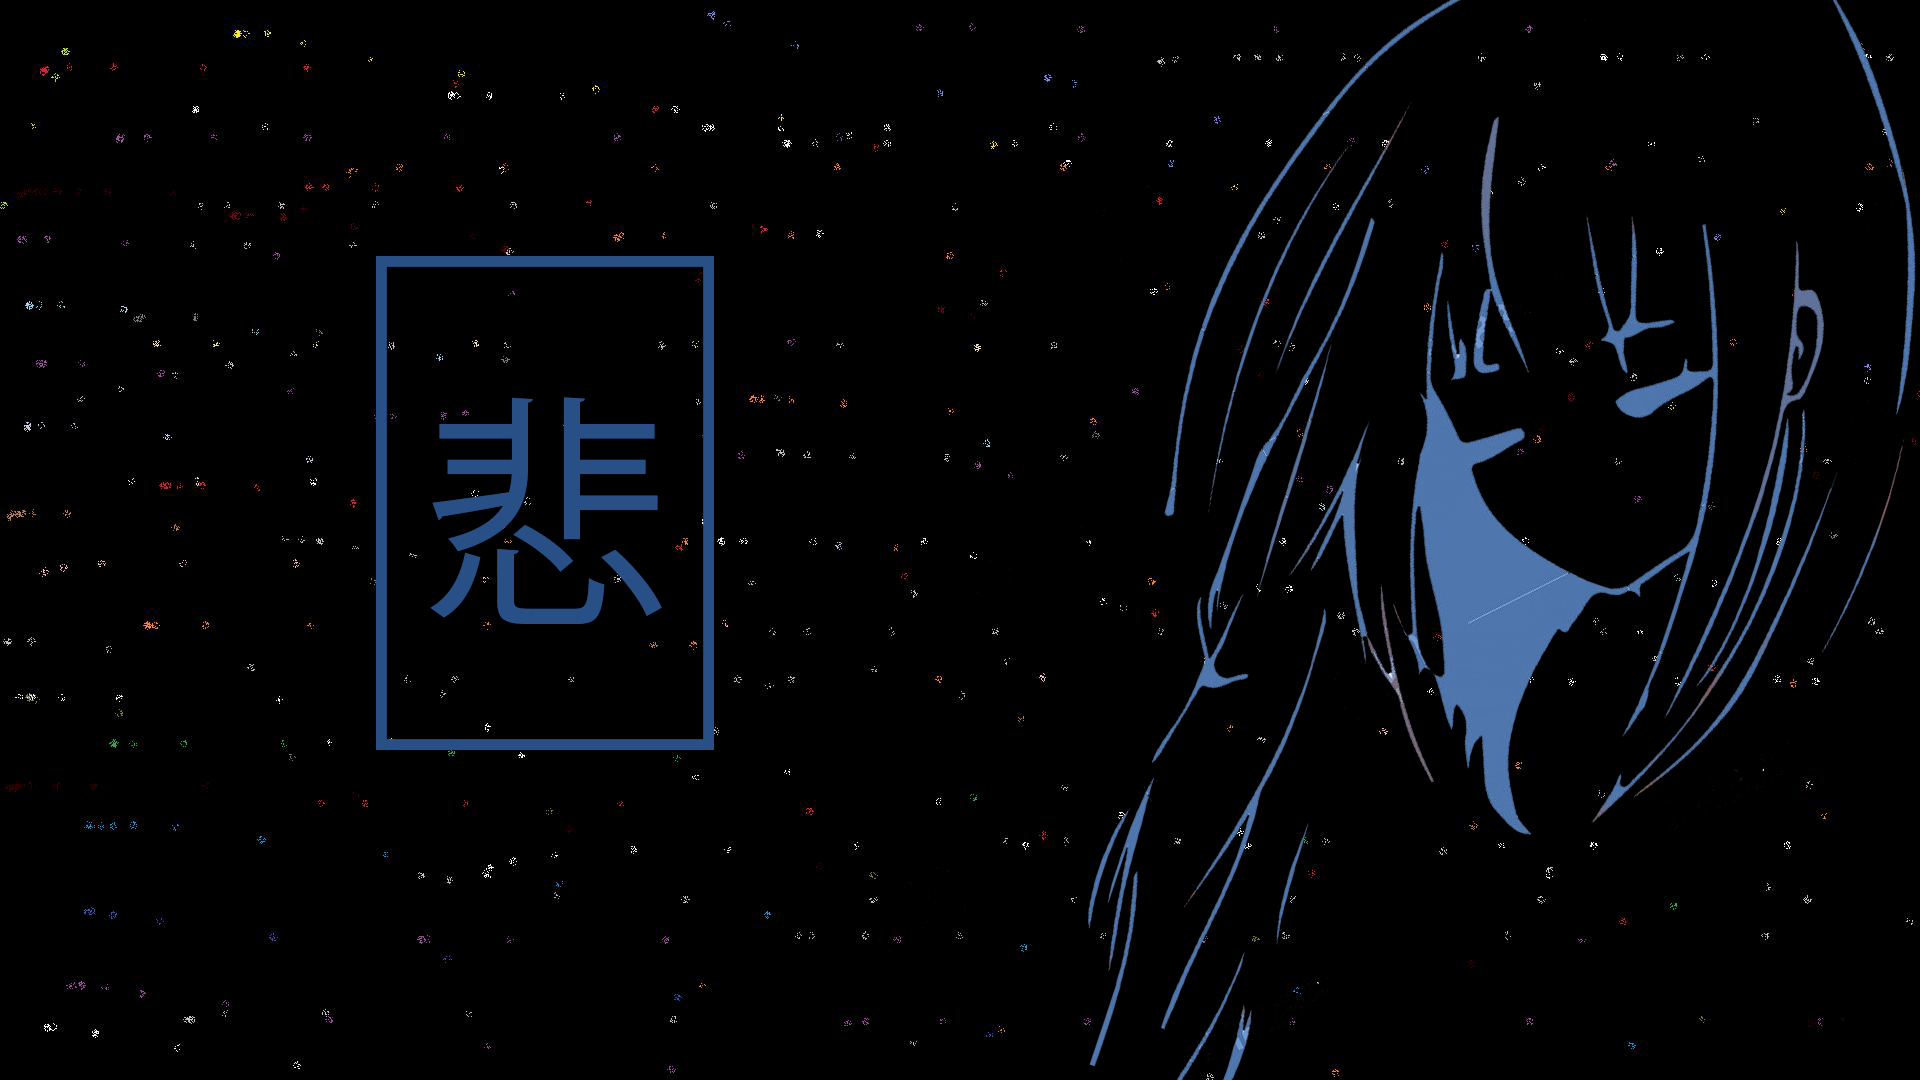 The kanji means sad.I hope that is enough aesthetic for you